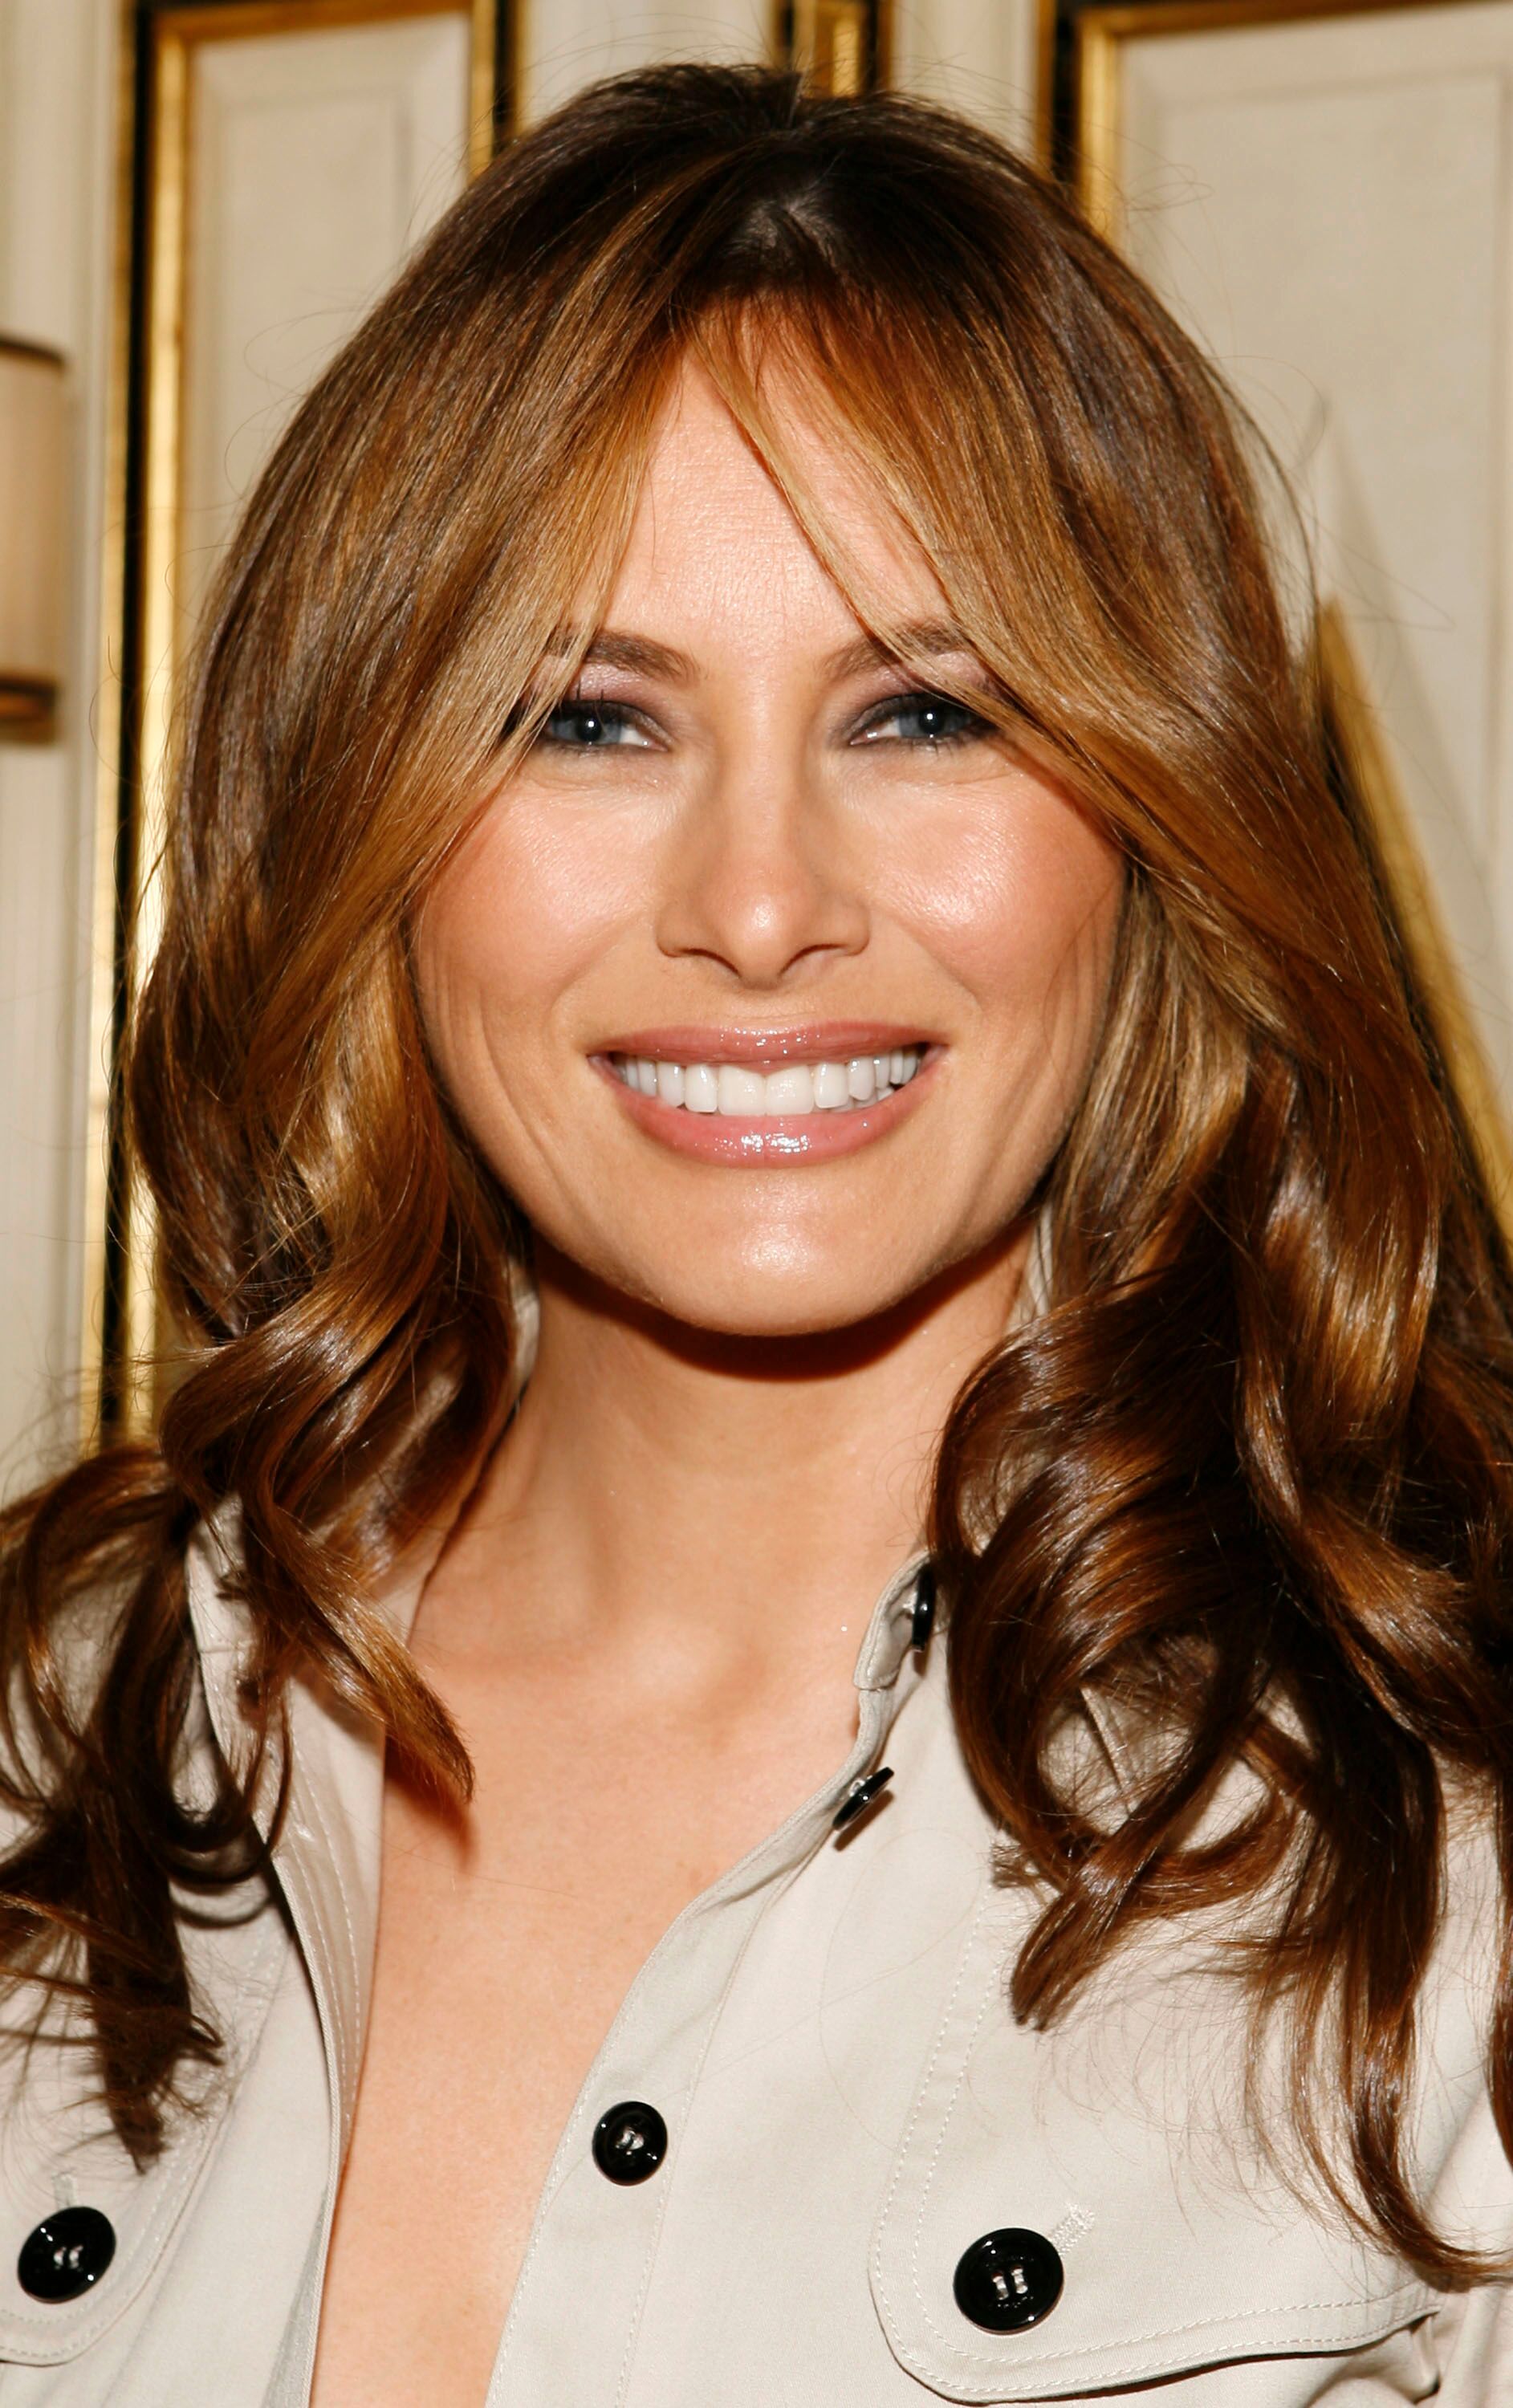 Melania Trump attends the Best & Co. Fashion Show and Breakfast to Benefit Society of Memorial Sloan-Kettering at Bergdorf Goodman on April 12, 2007 in New York City | Photo: Getty Images